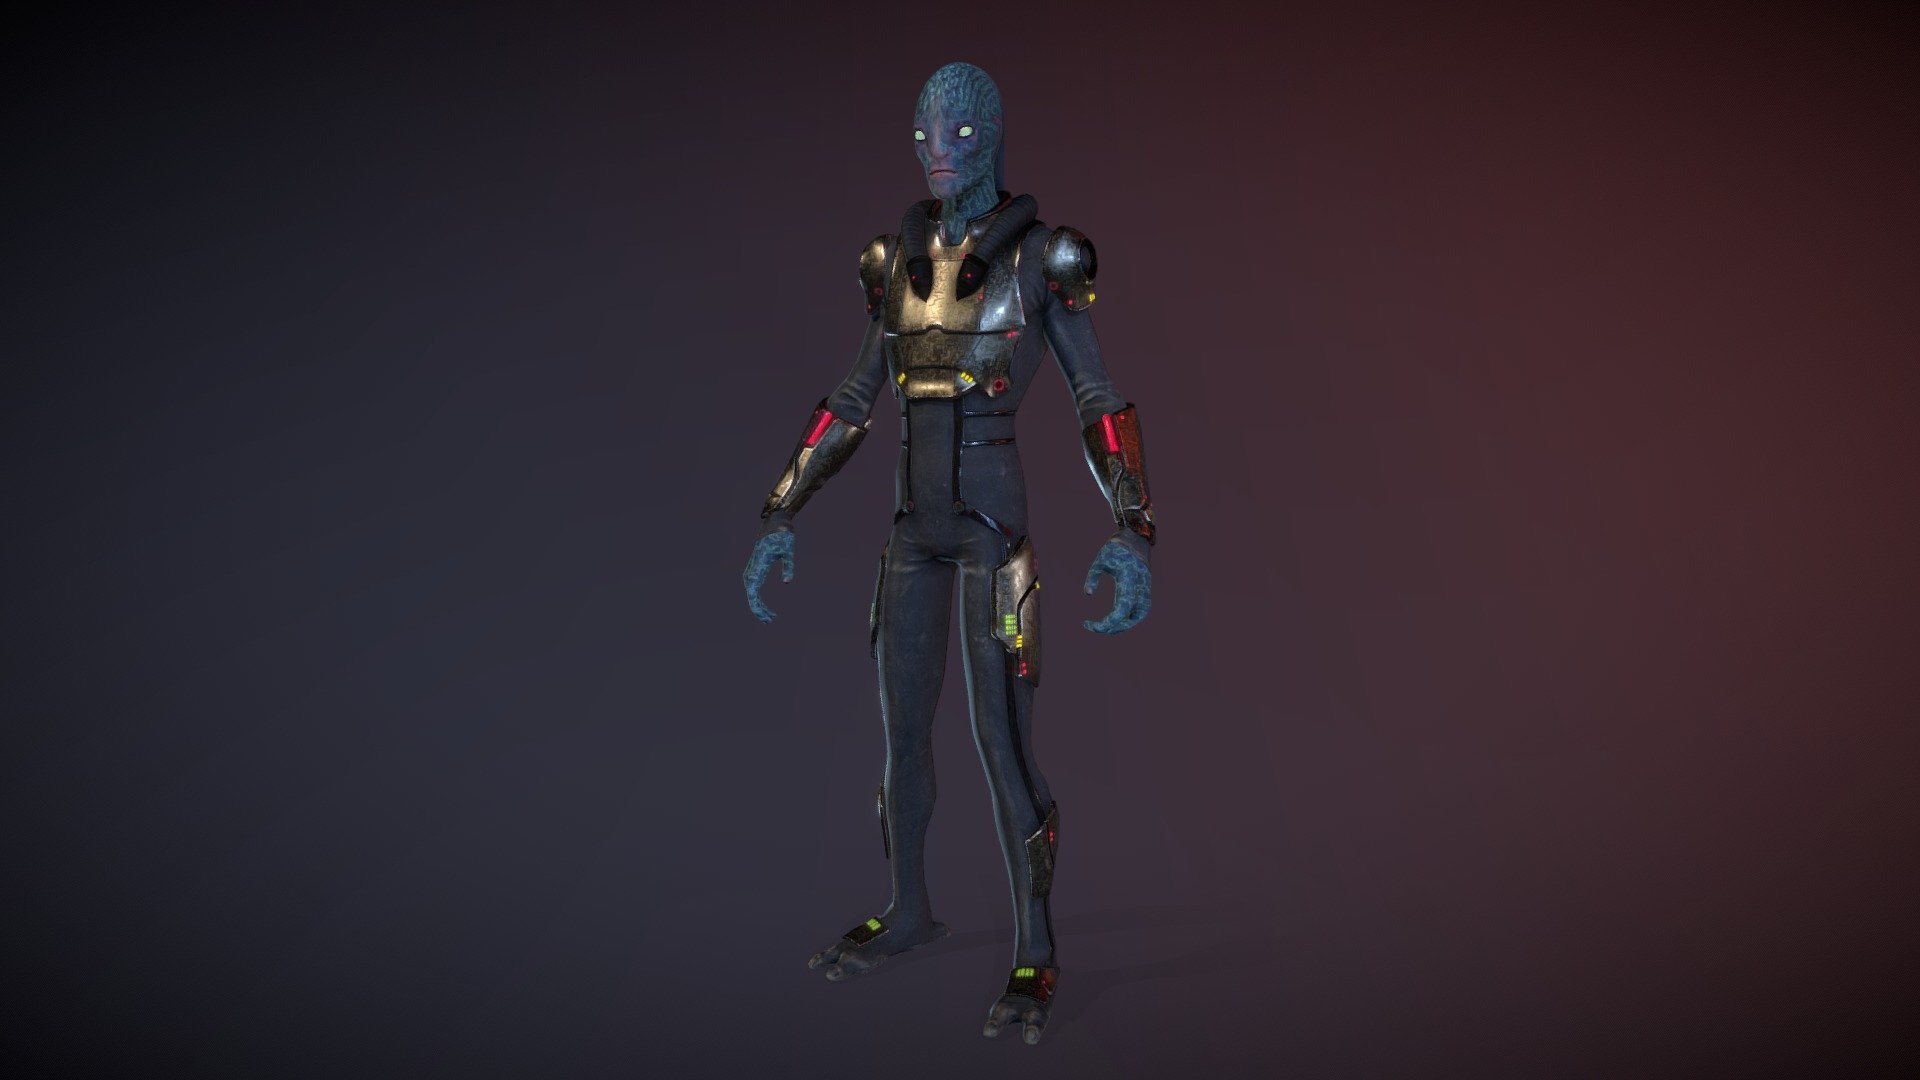 This character can be found also at Unreal Marketplace and Unity Asset Store 3d model